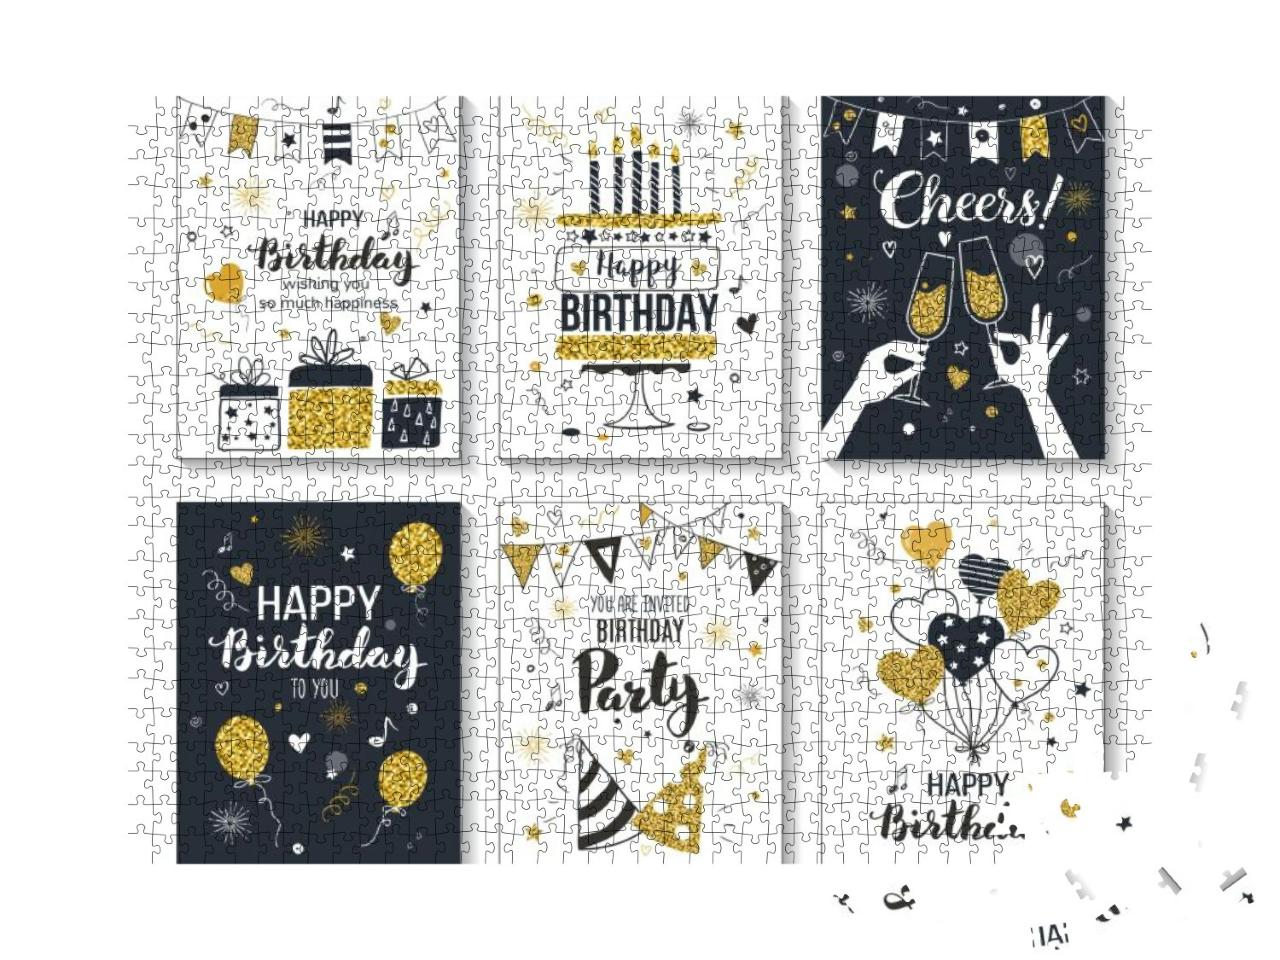 Happy Birthday Greeting Card & Party Invitation Templates... Jigsaw Puzzle with 1000 pieces